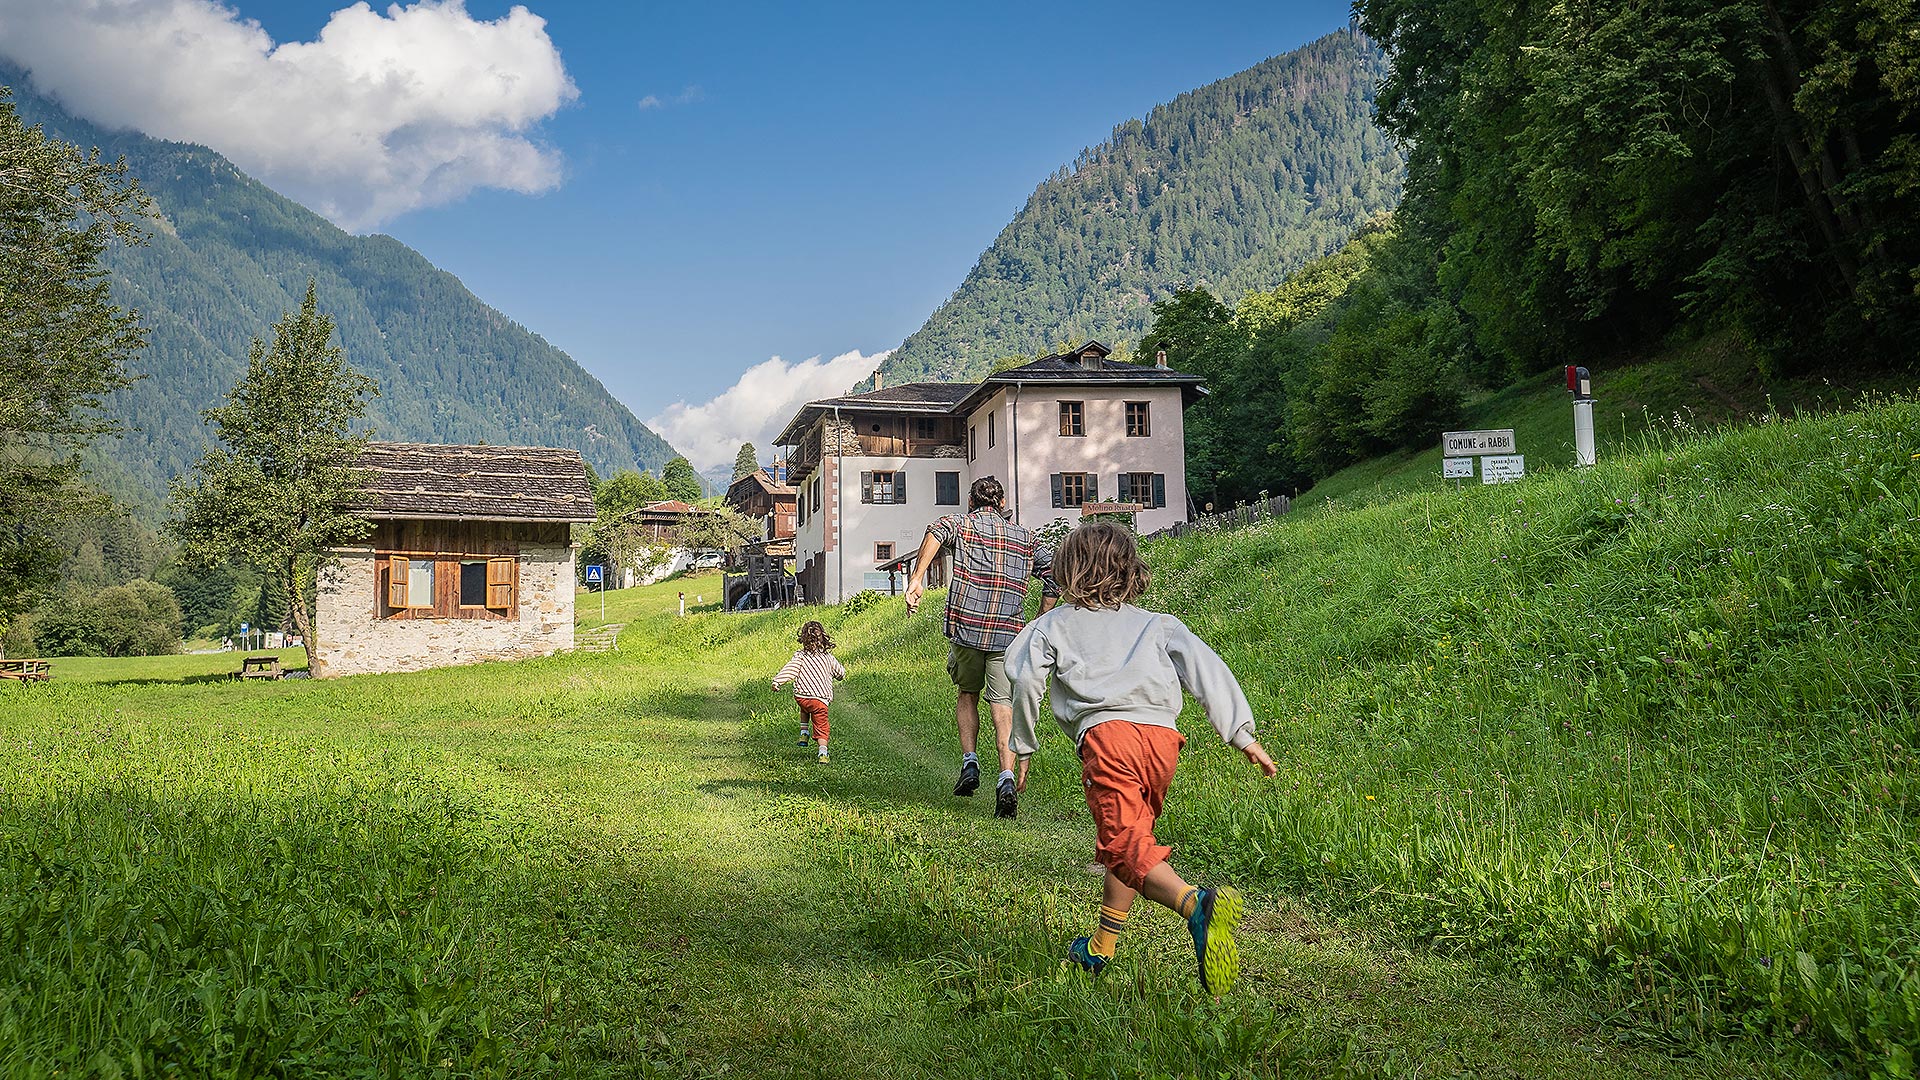 The AlpHoliday Family Hotel in Val di Sole is the right place to enjoy an unforgettable experience for the whole family.